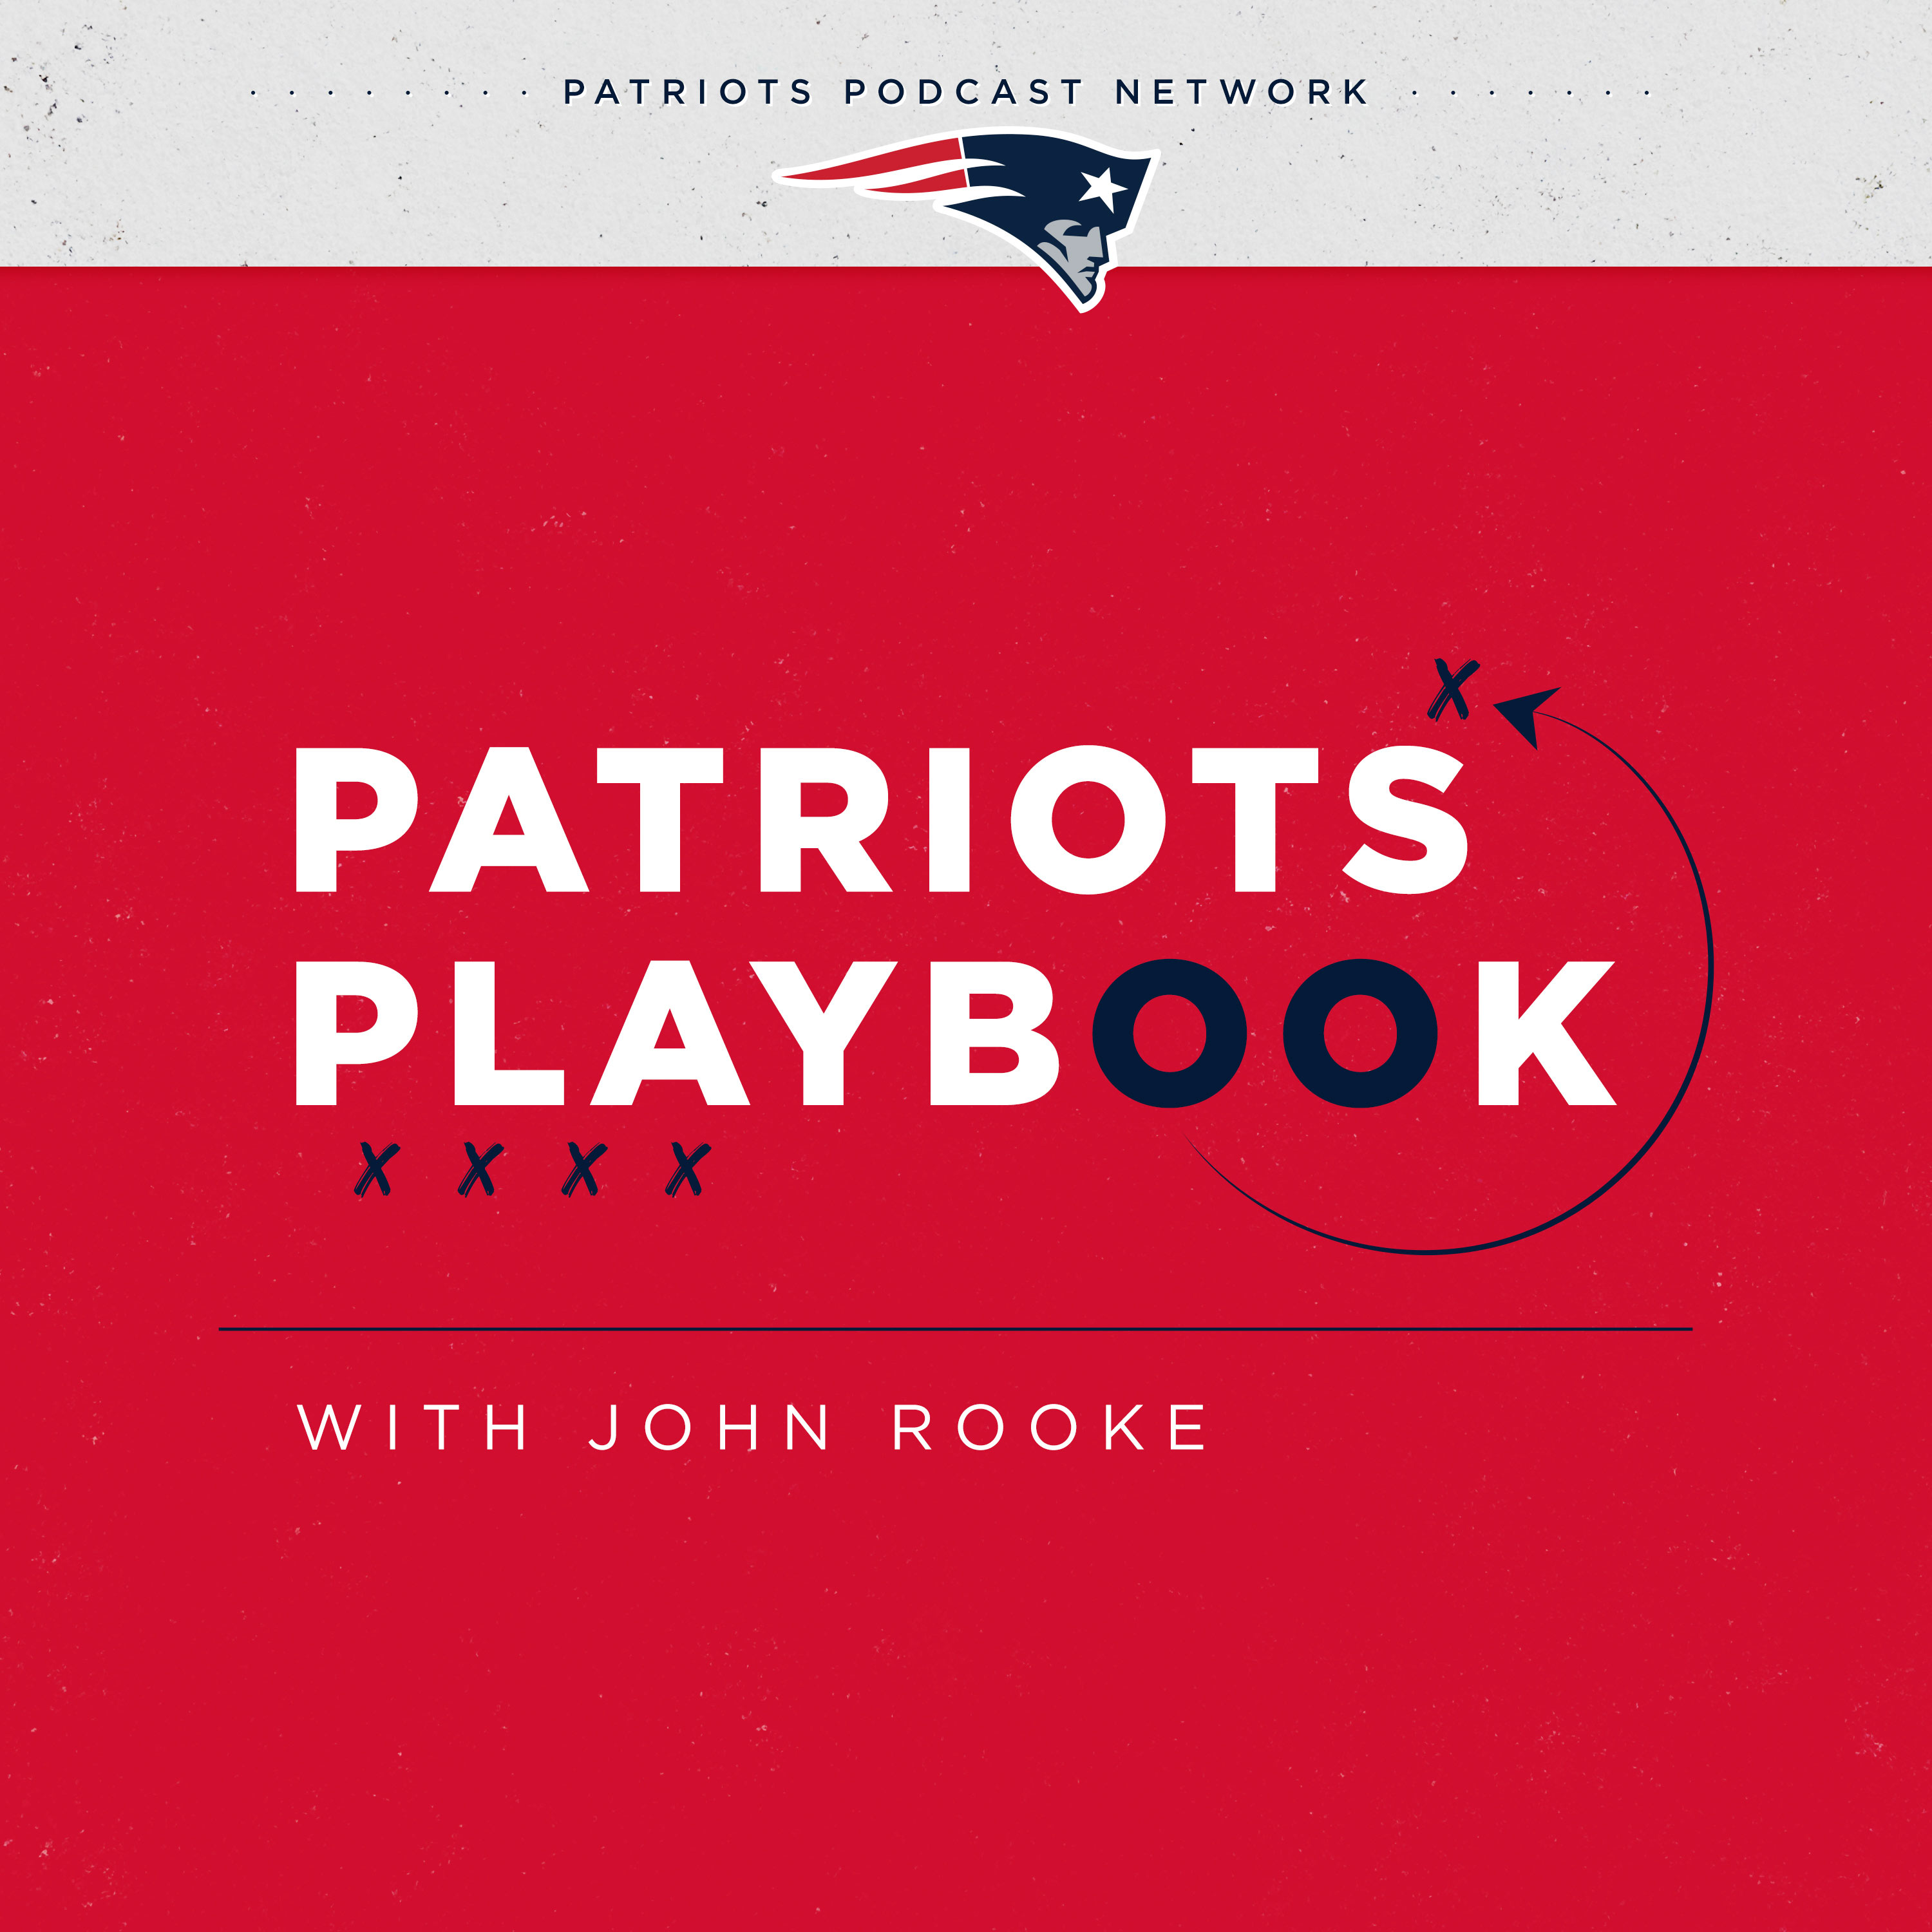 Patriots Playbook 12/16: Colts Preview and NFL Week 15 Predictions